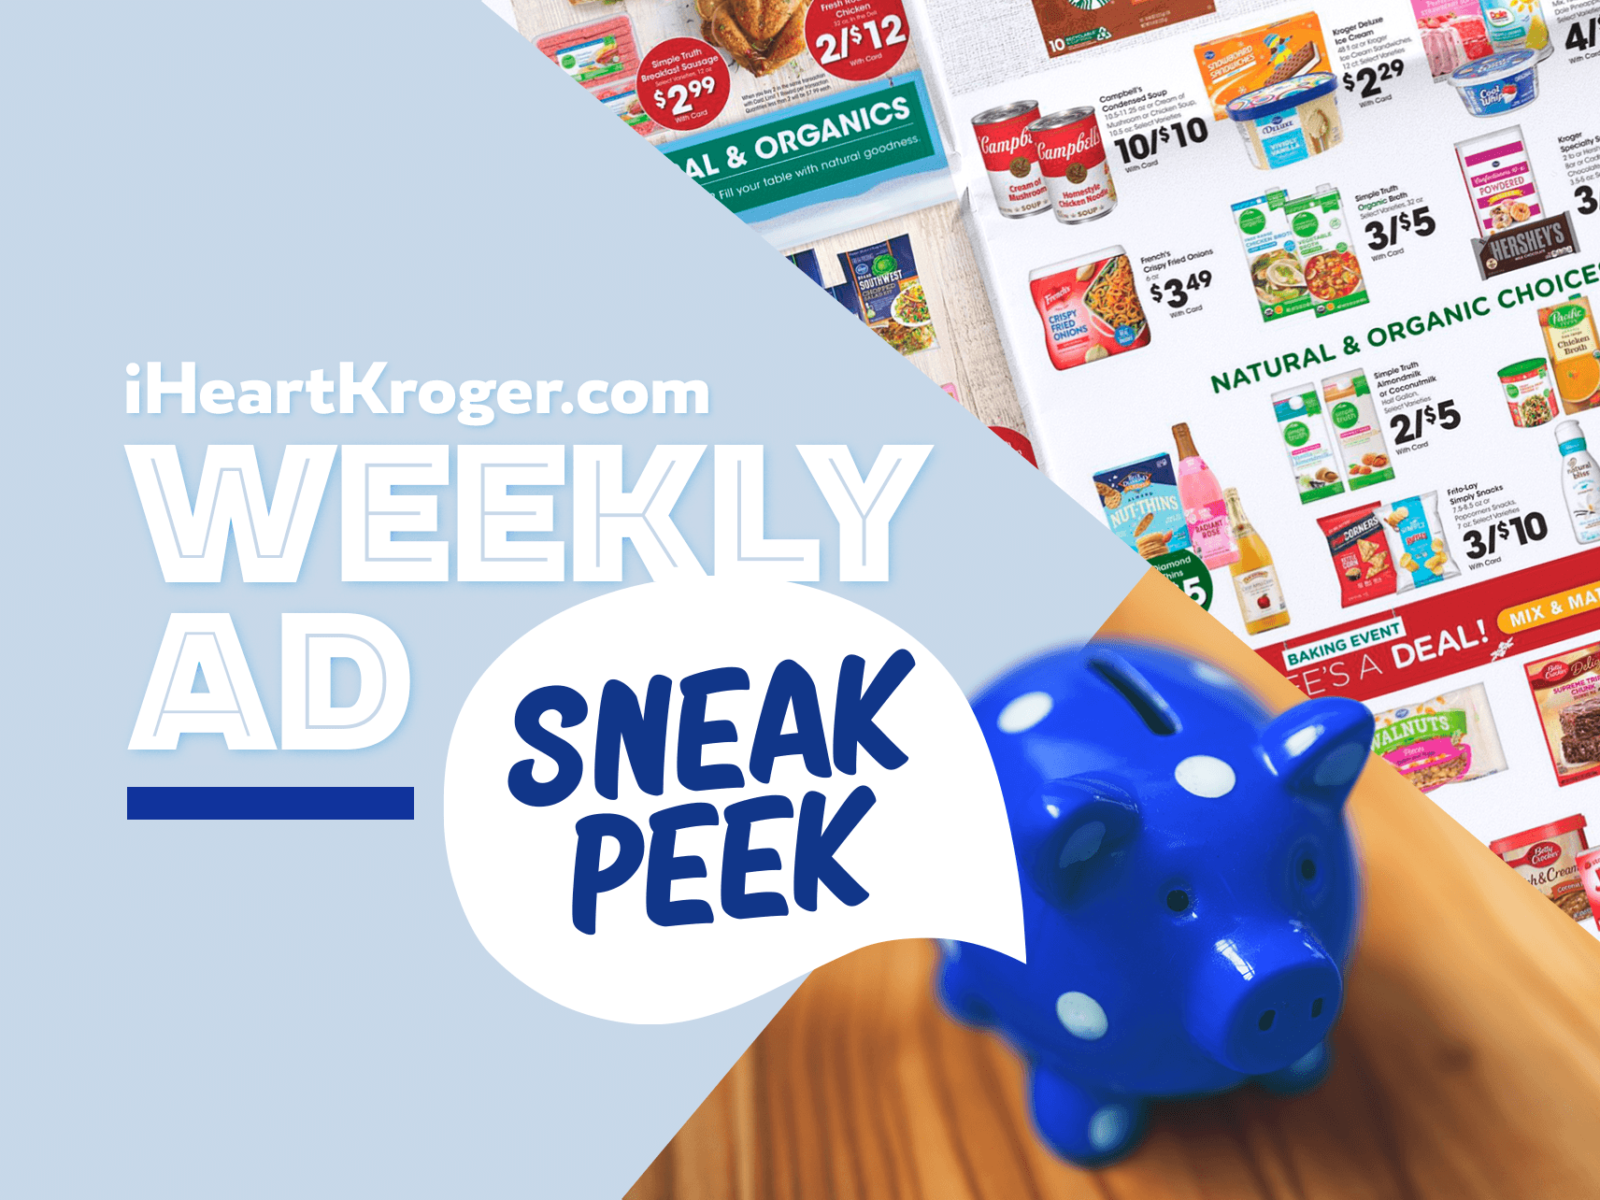 Kroger Ad & Coupons Week Of 2/8 to 2/14 – Mega Sale Continues!